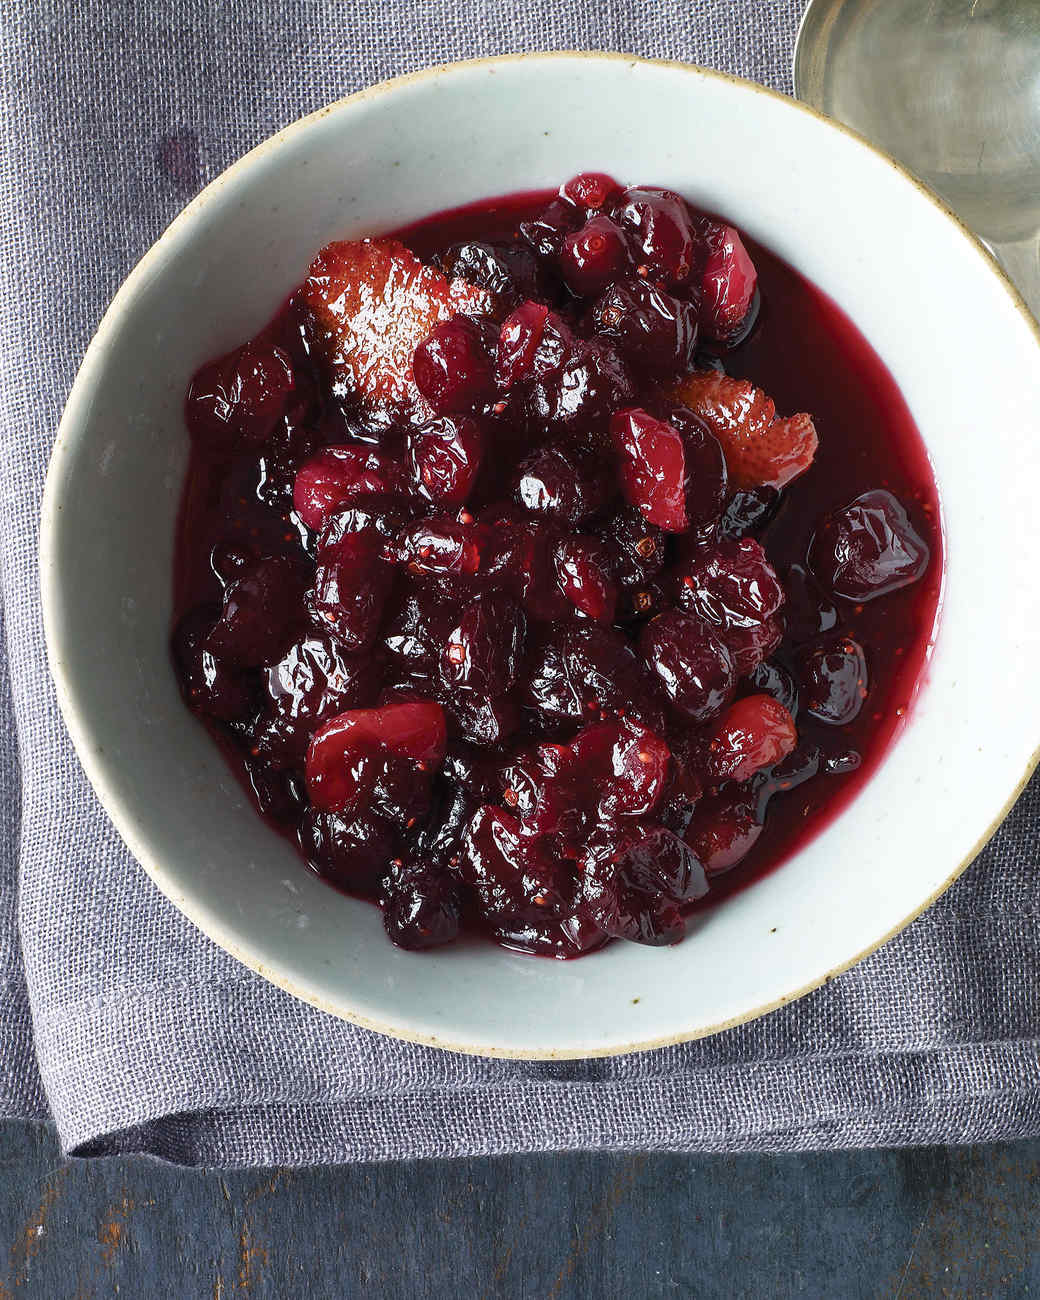 What is a good recipe for cranberry orange sauce?